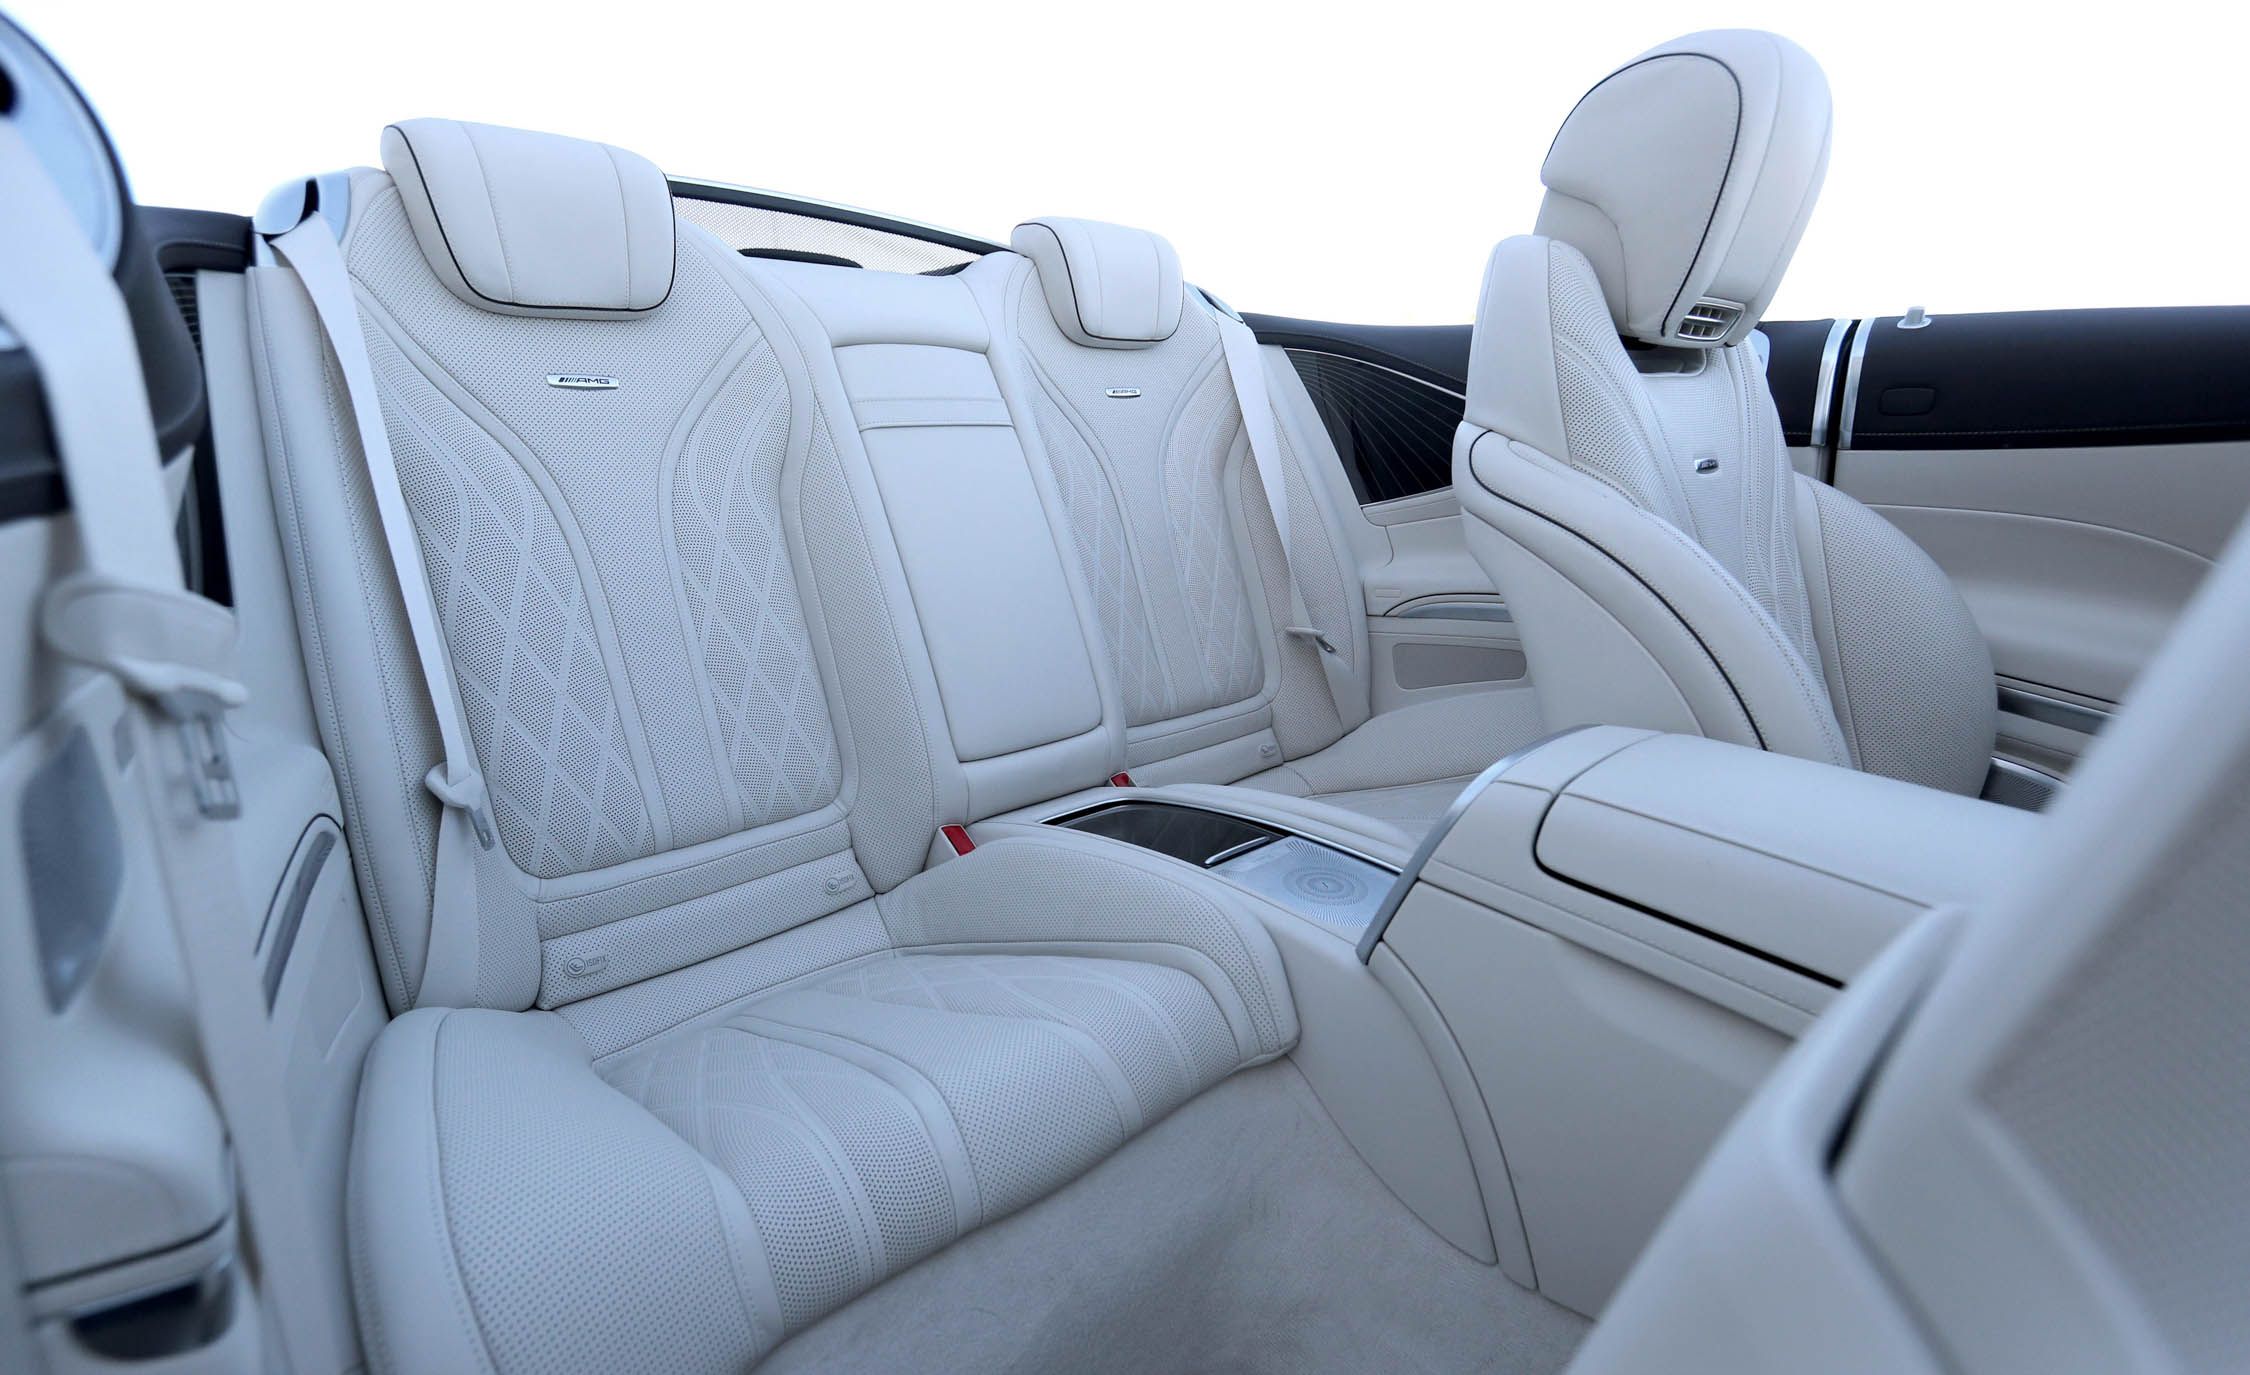 2017 Mercedes Amg S63 Cabriolet Interior Seats Rear Back (View 19 of 38)